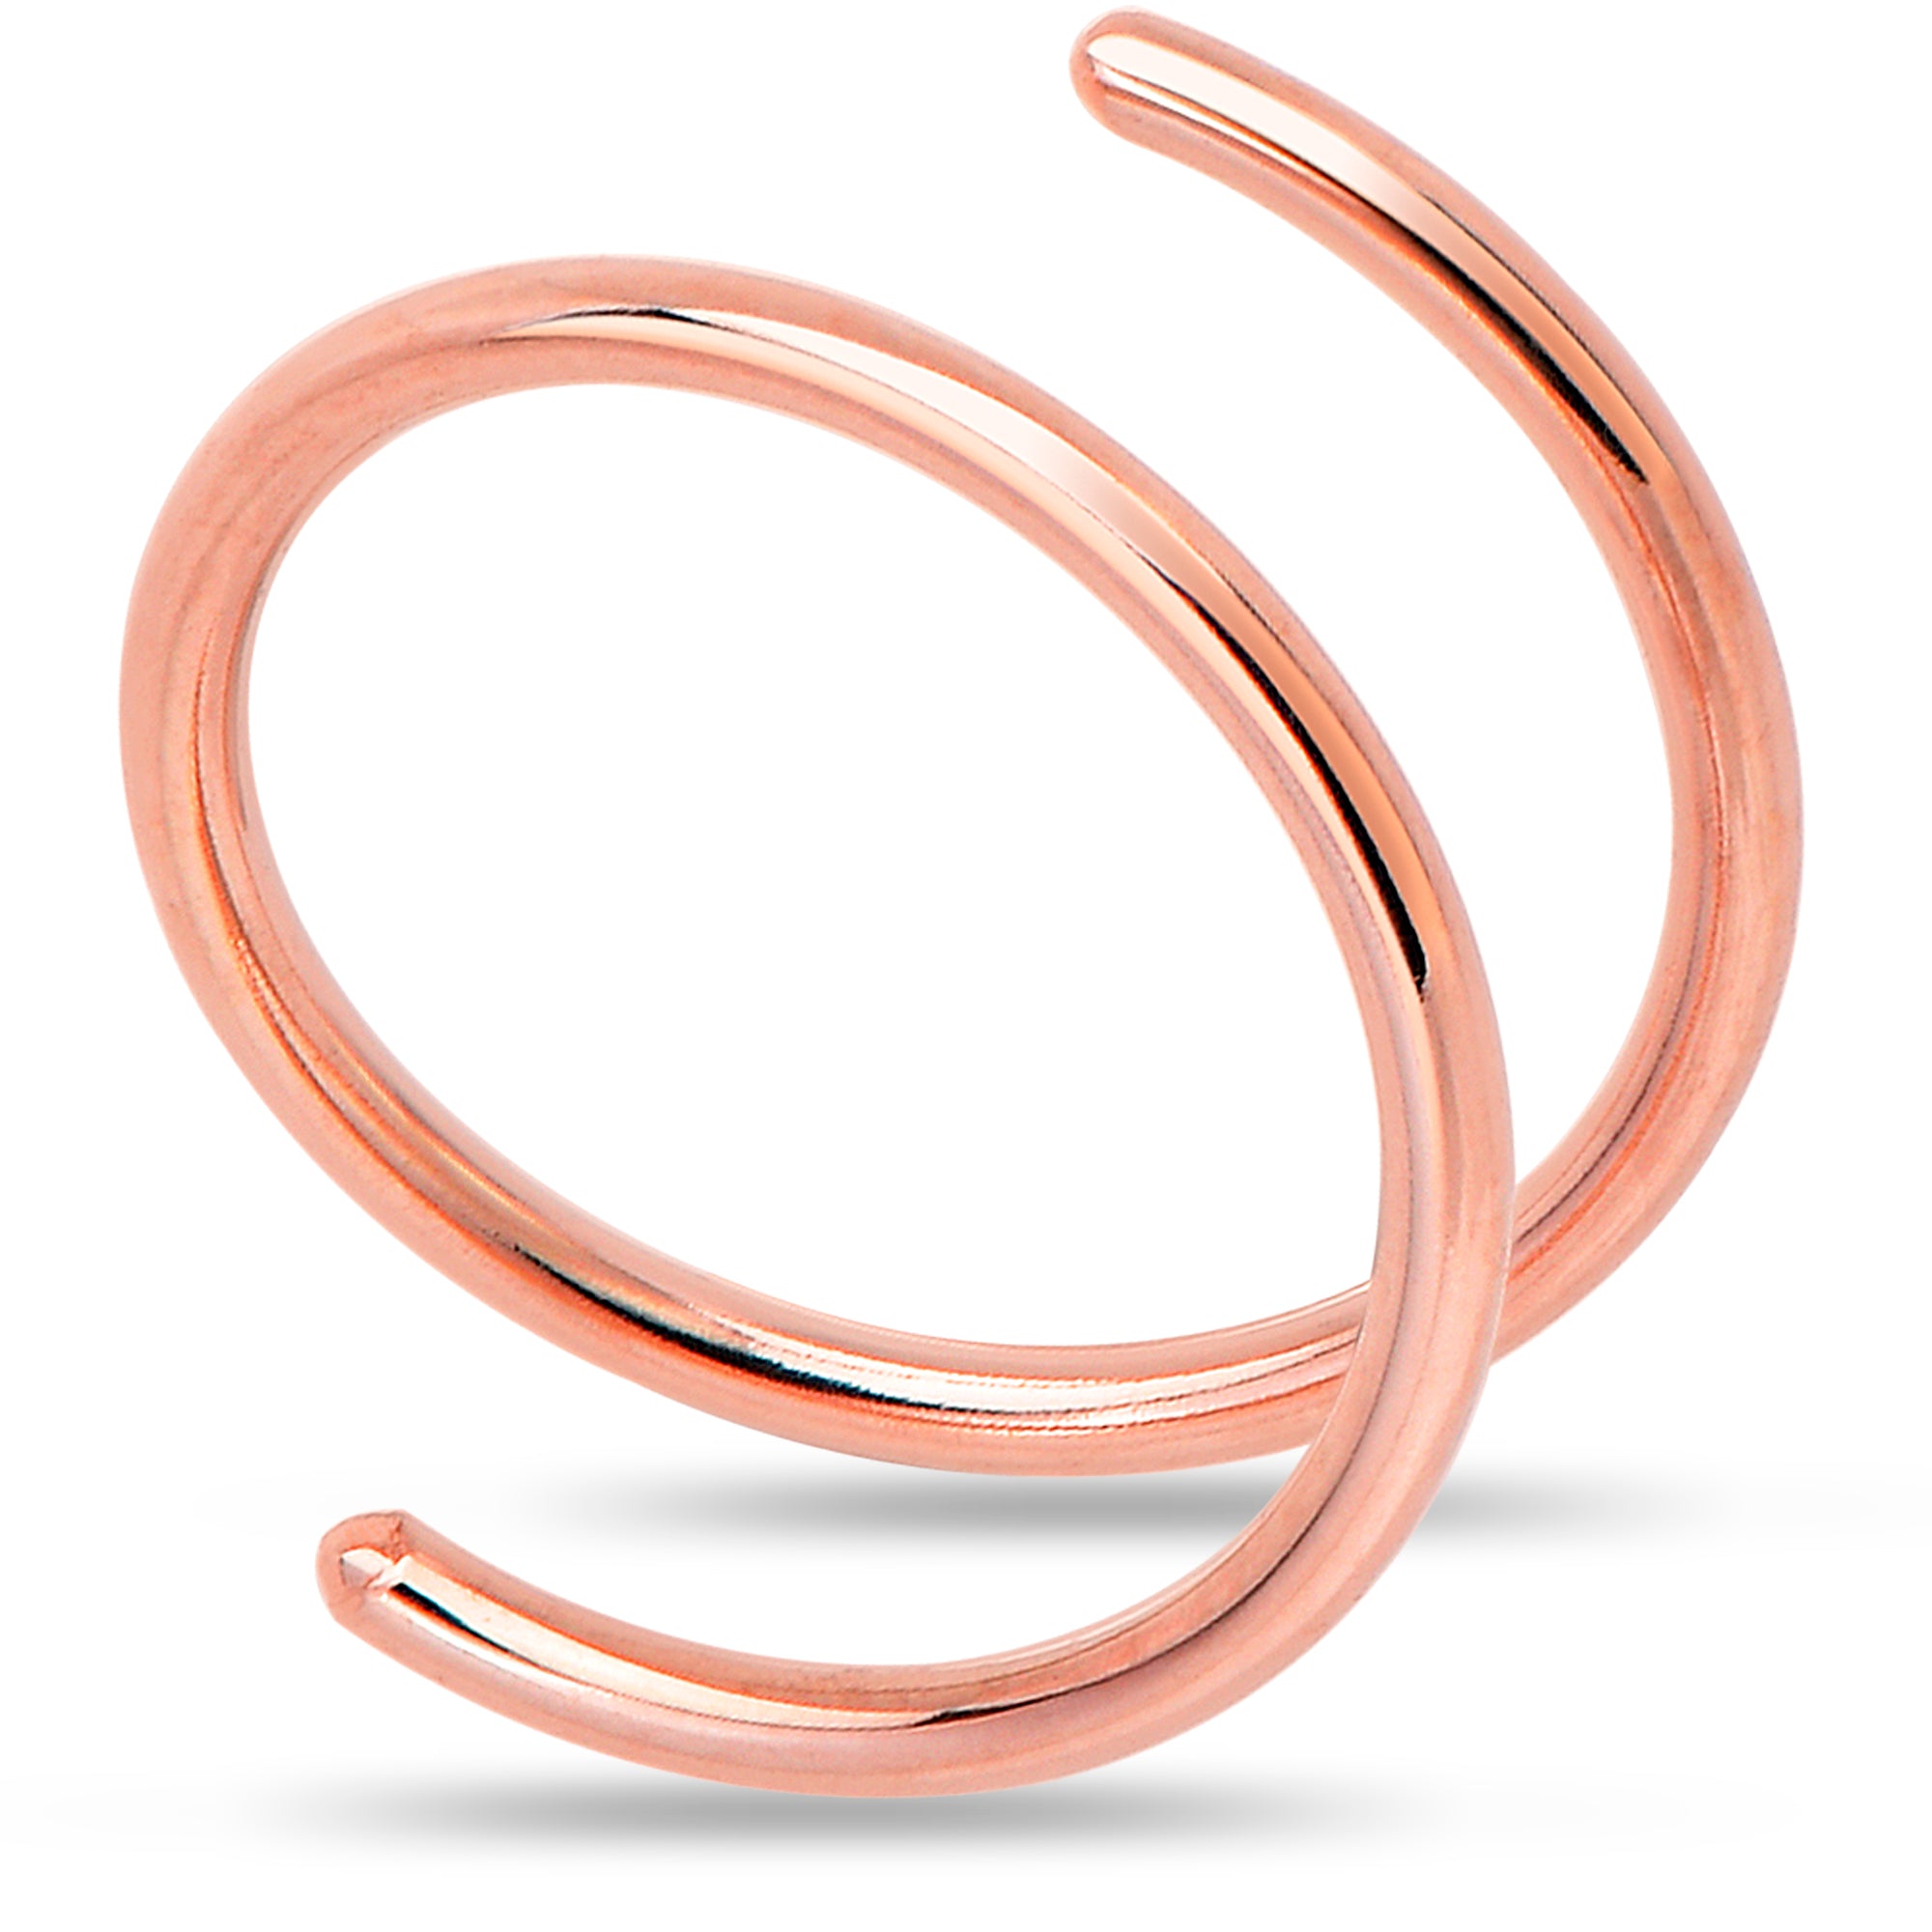 Double Hoop Nose 14k Rose Gold Filled Spiral Nose Ring (Select Your Size)